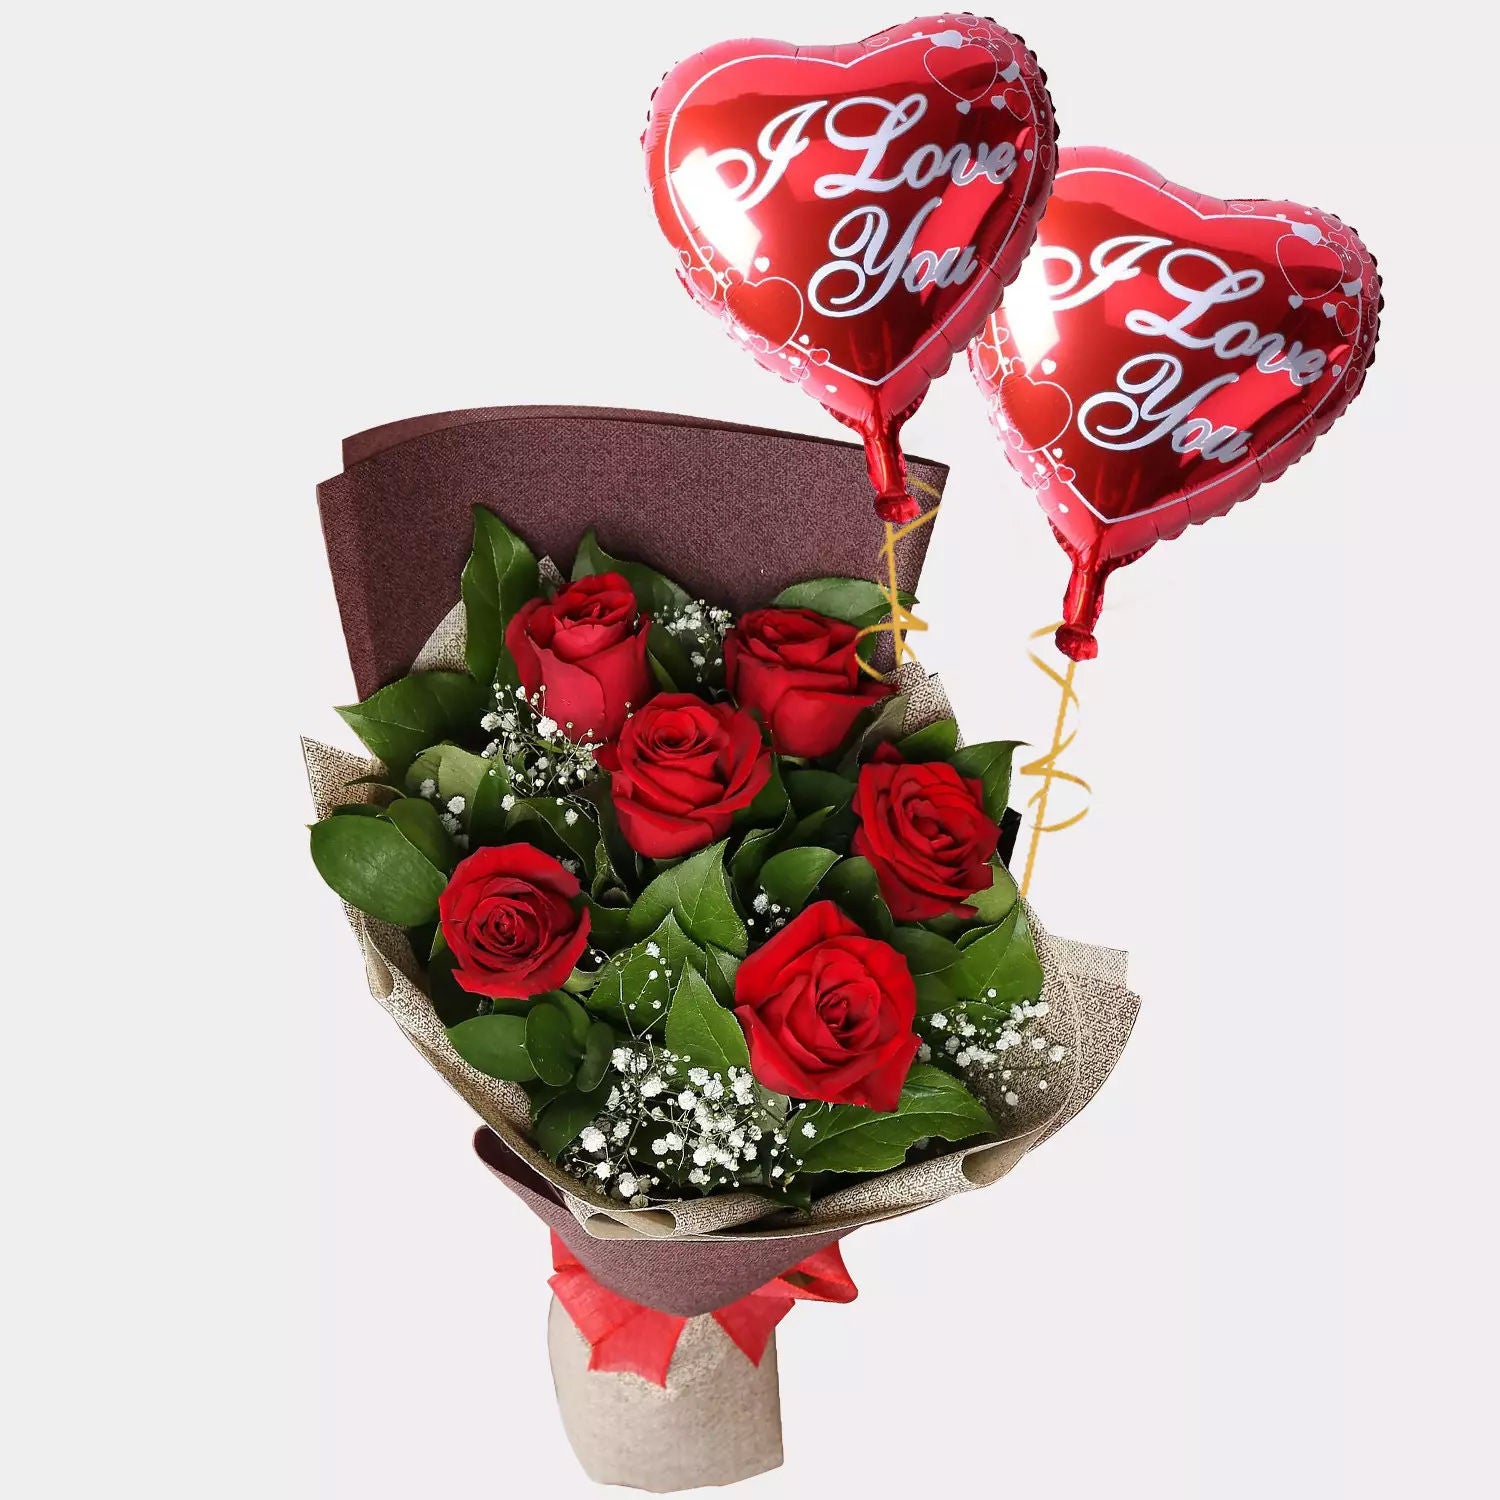 Romantic Valentine Day Gifts For Wife | Upto 30% OFF - Winni